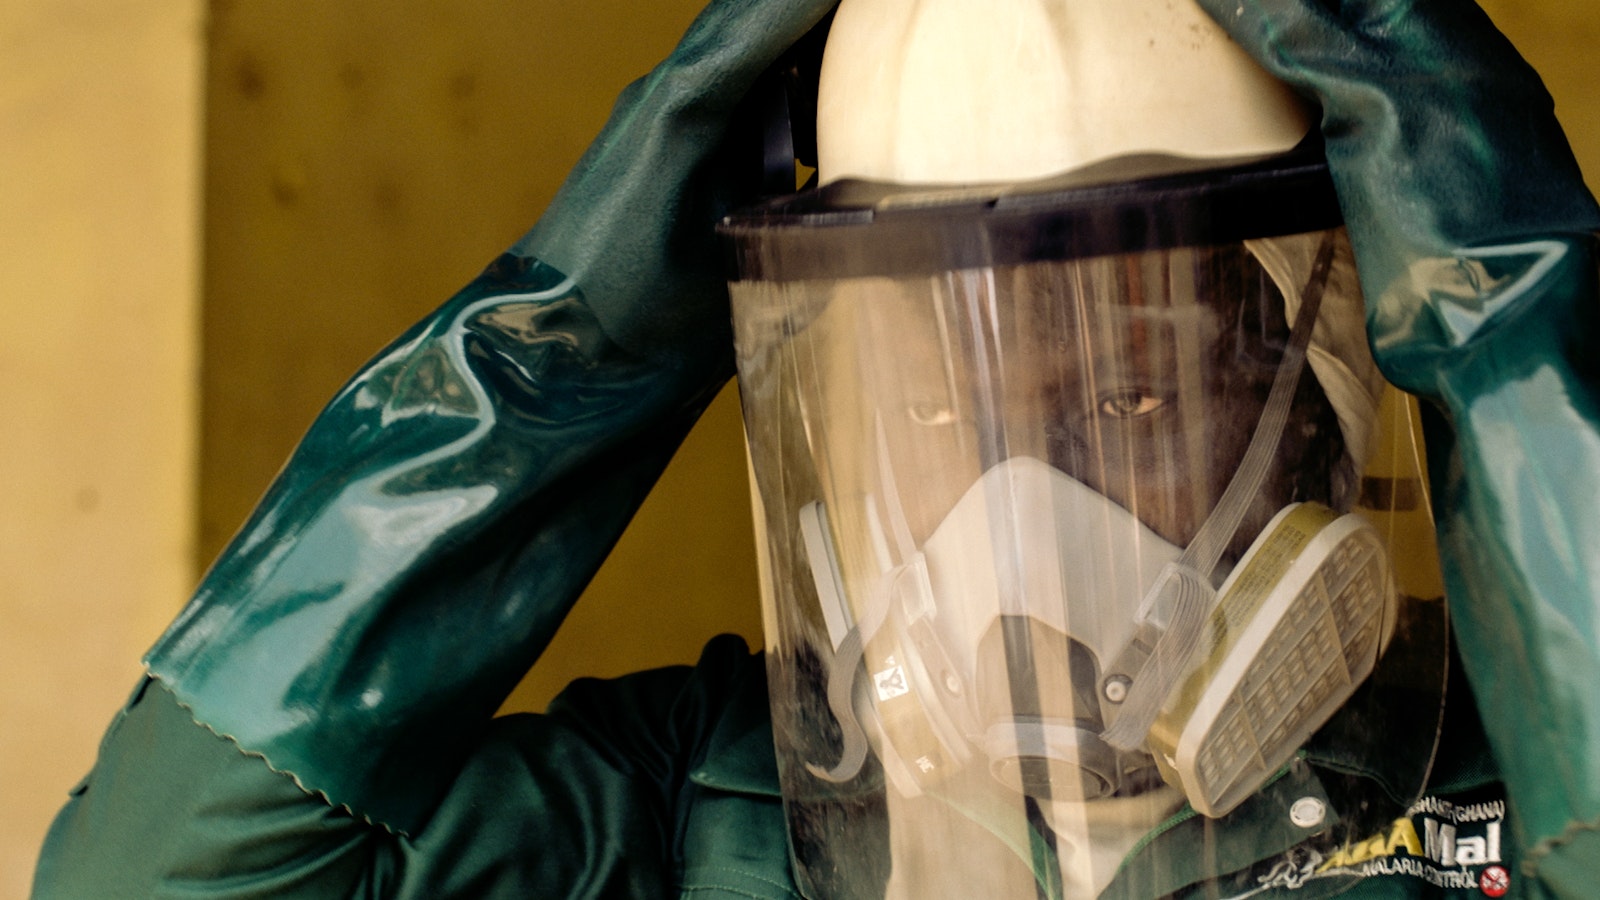 A person wearing a green protective suit and a breathing mask puts on a protective visor,  ready to spray insecticide.